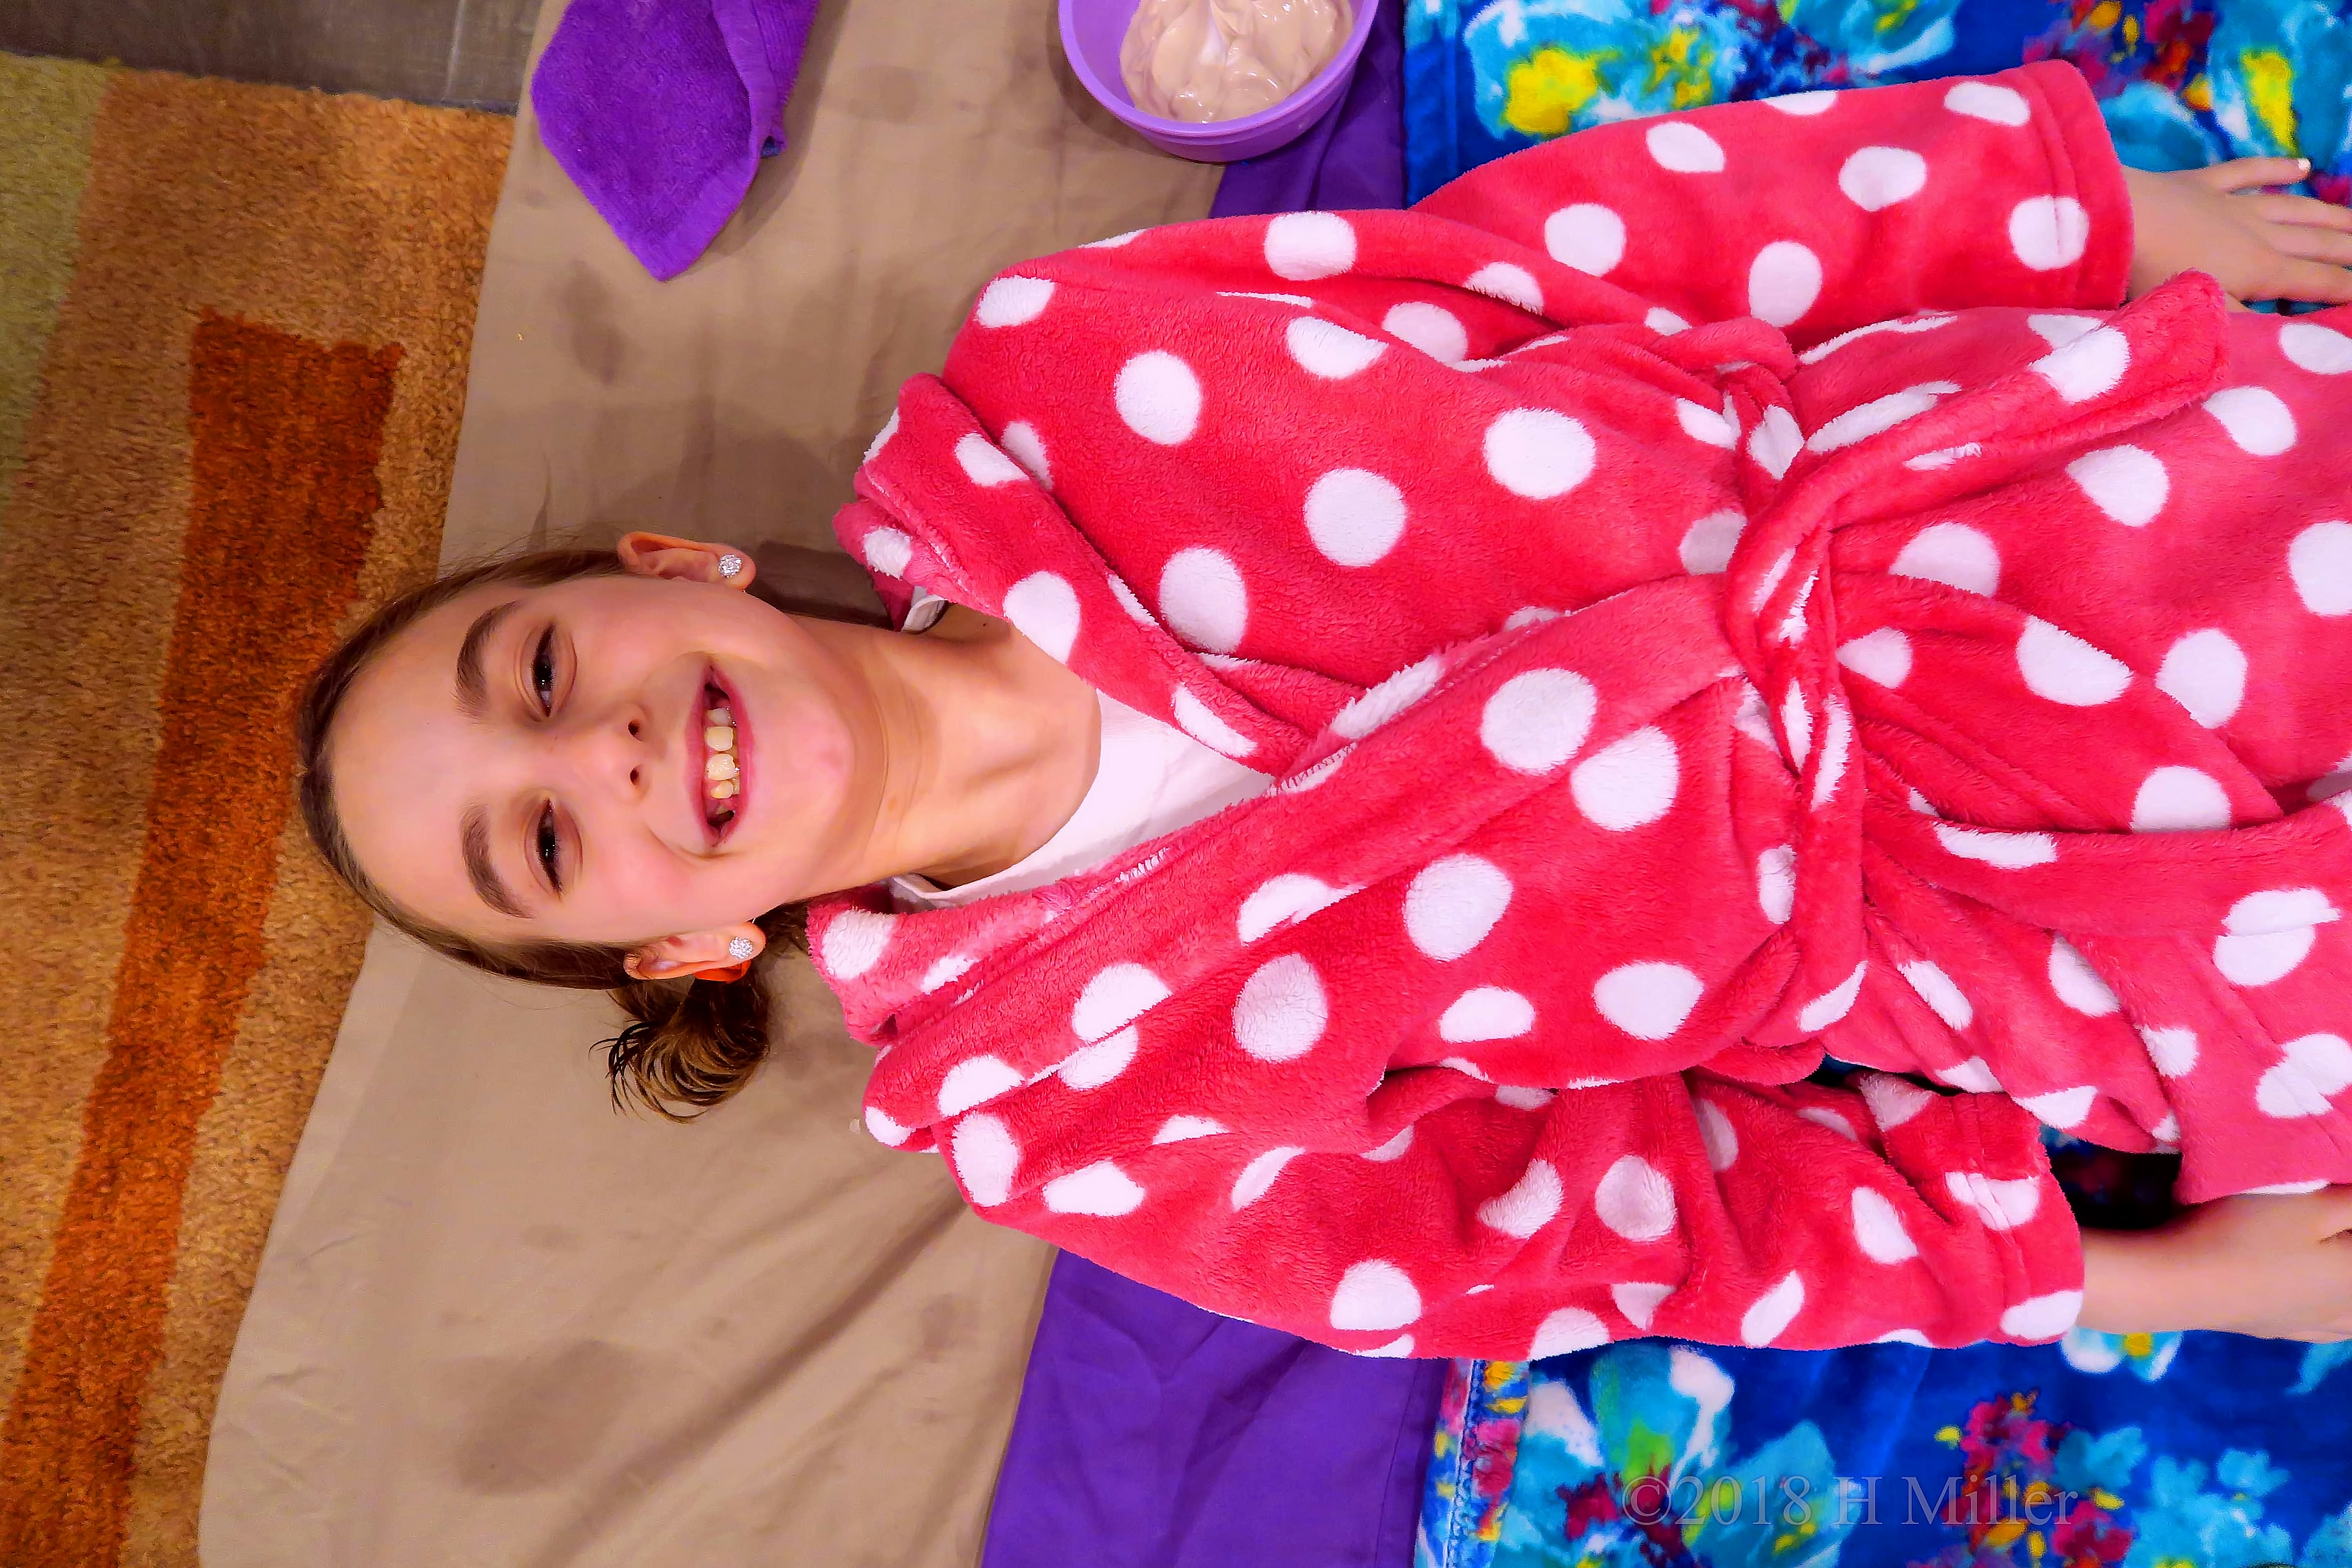 Super Comfy In Her White PolkaDot Spa Robe Before Girls Facials! 